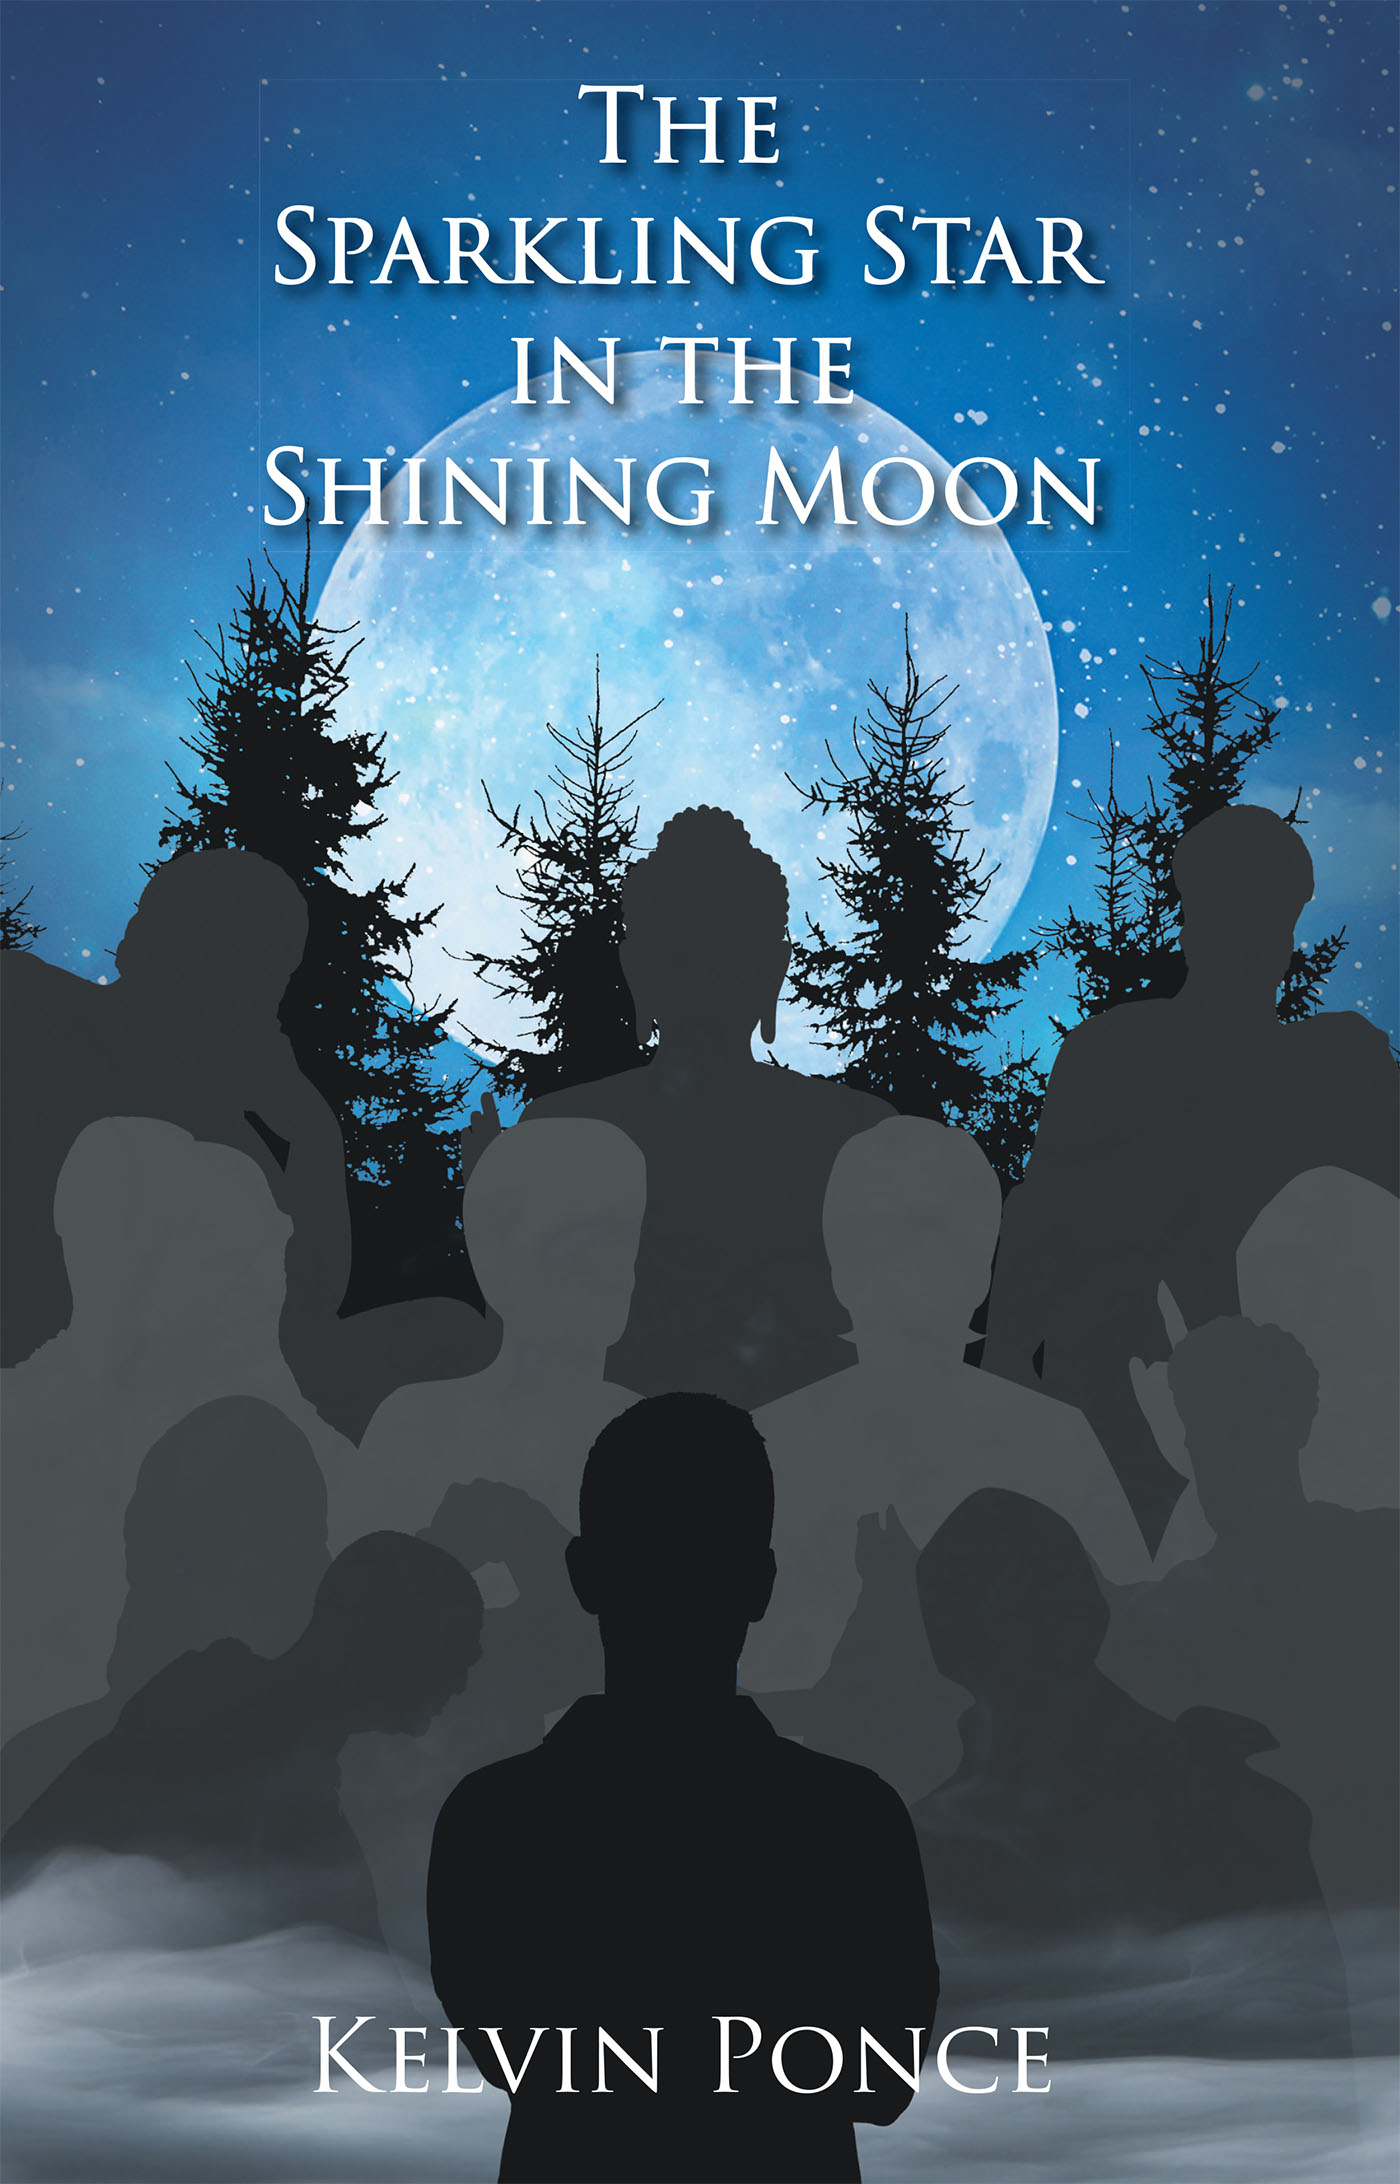 Author Kelvin Ponce’s New Book, "The Sparkling Star in the Shining Moon," is an Enthralling Reflection of the Author's Life and His Experiences as Told Through Poetry